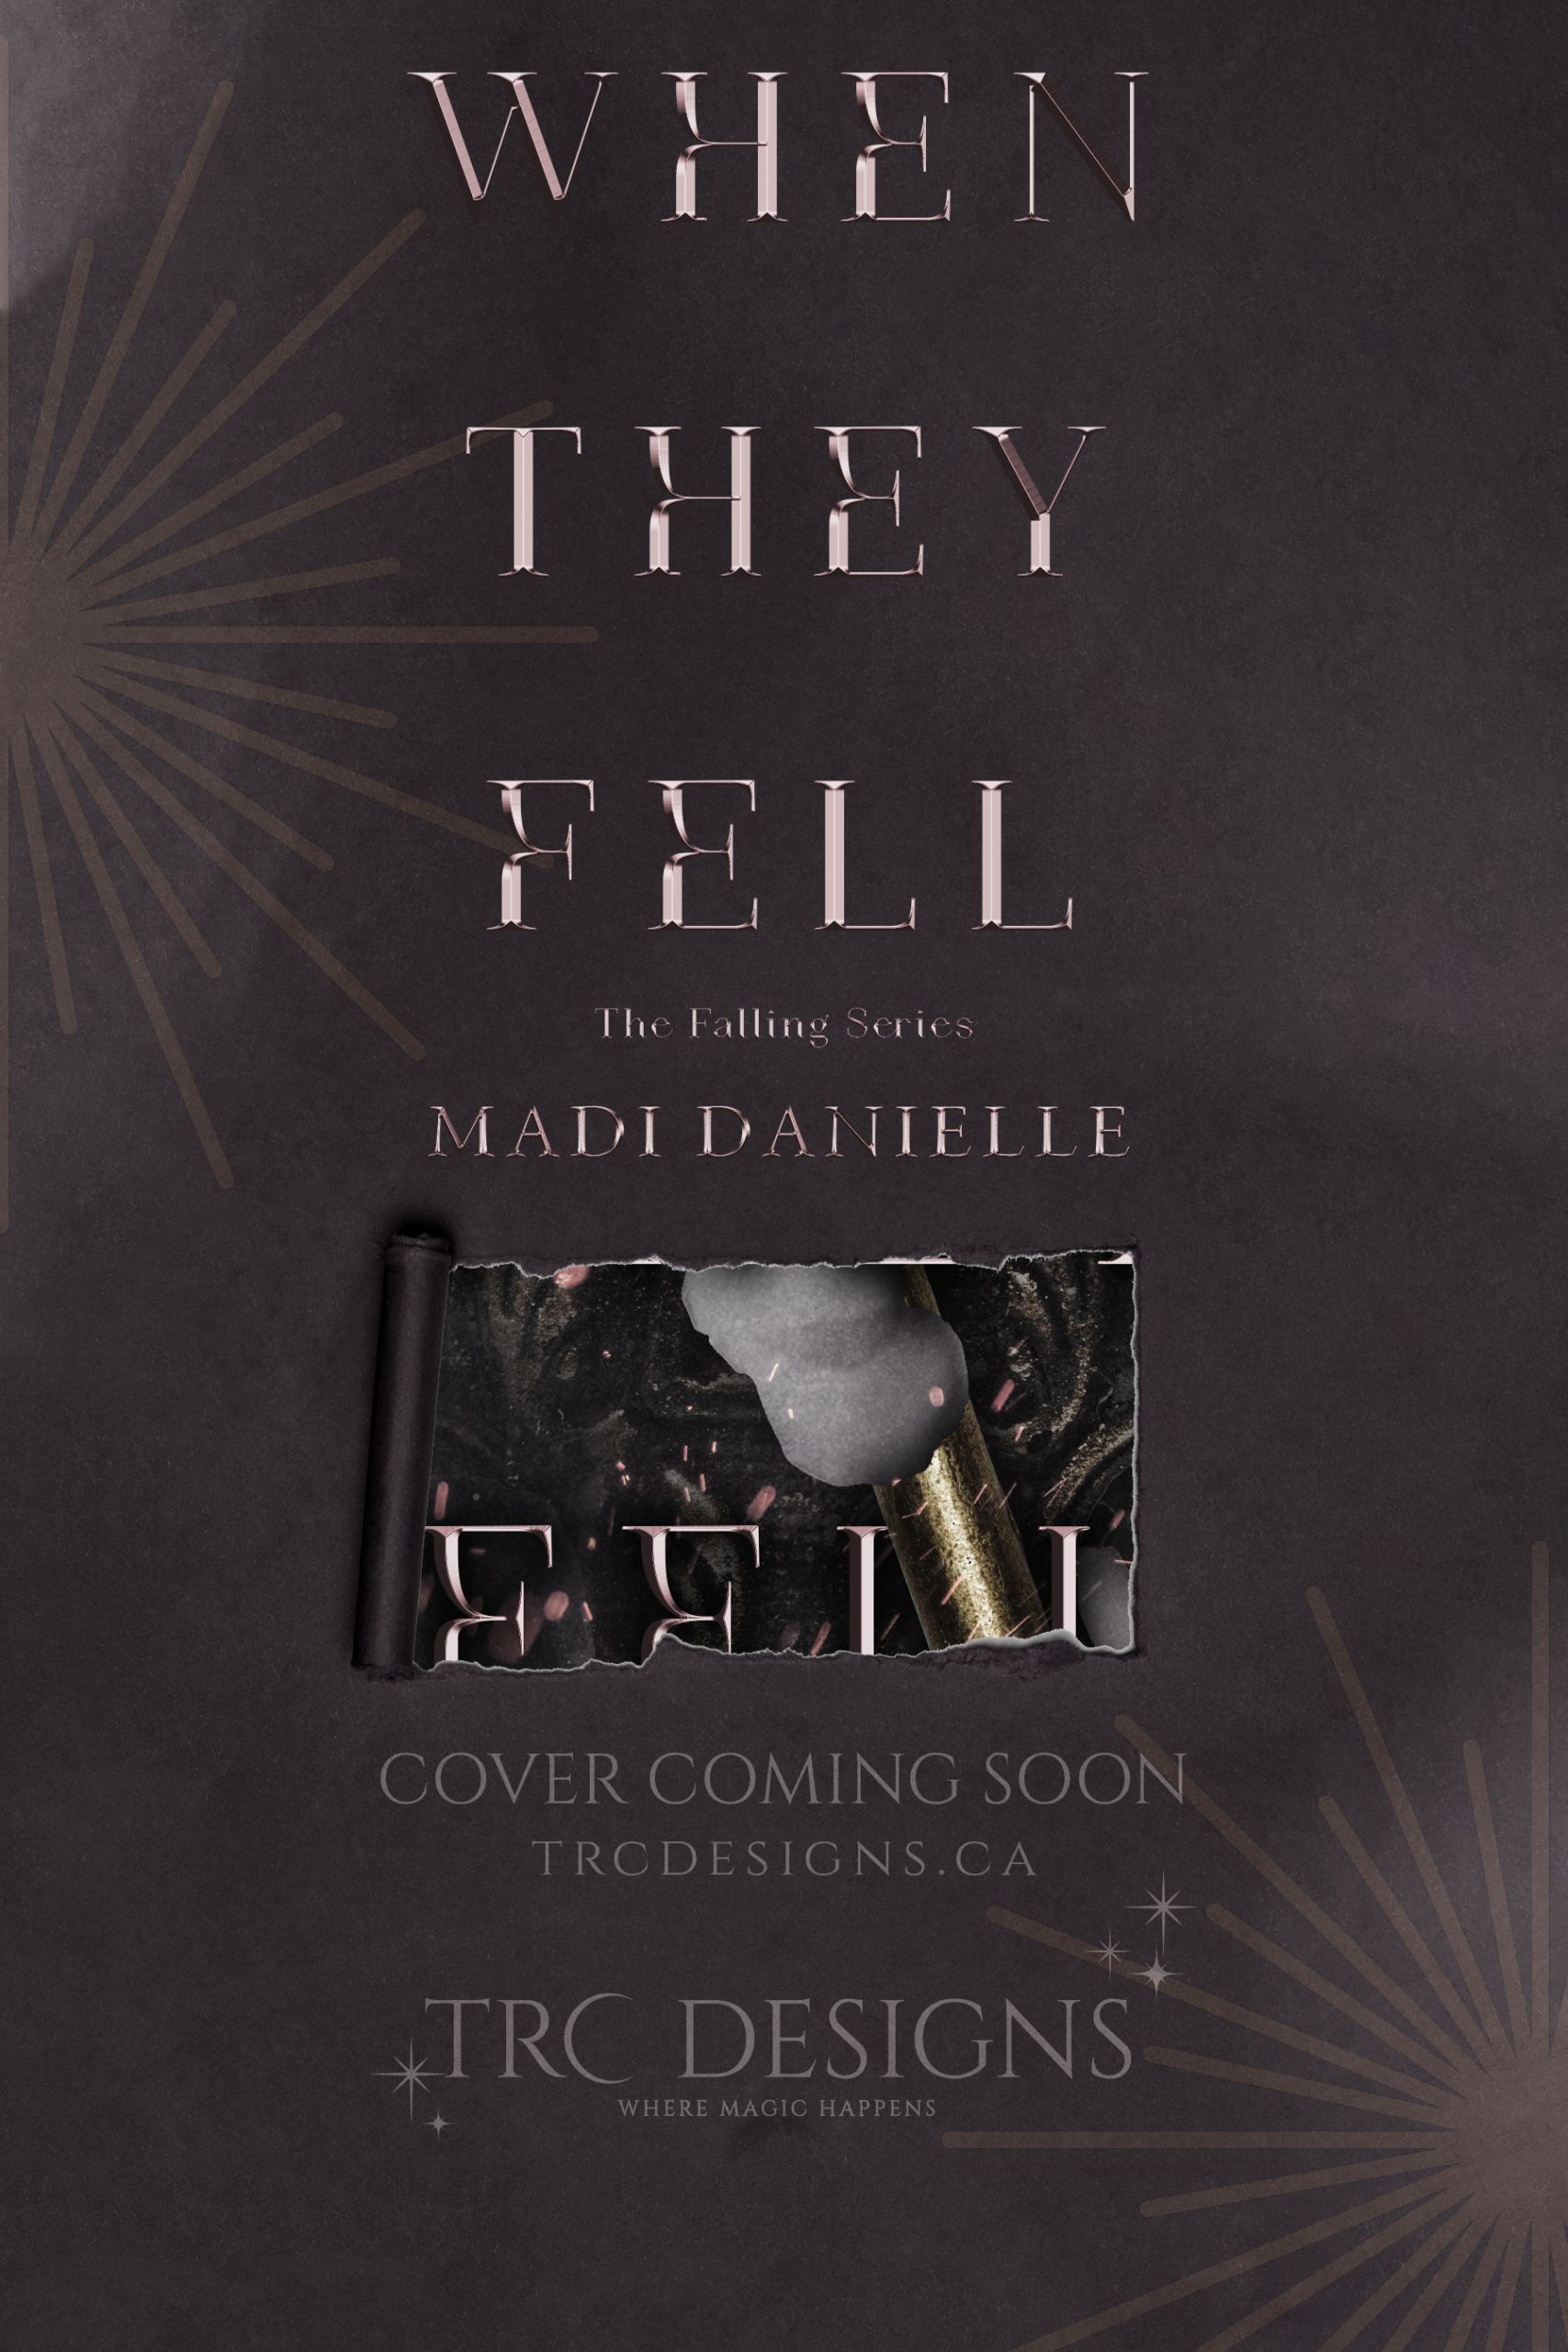 What They Feel by Madi Danielle PDF Download